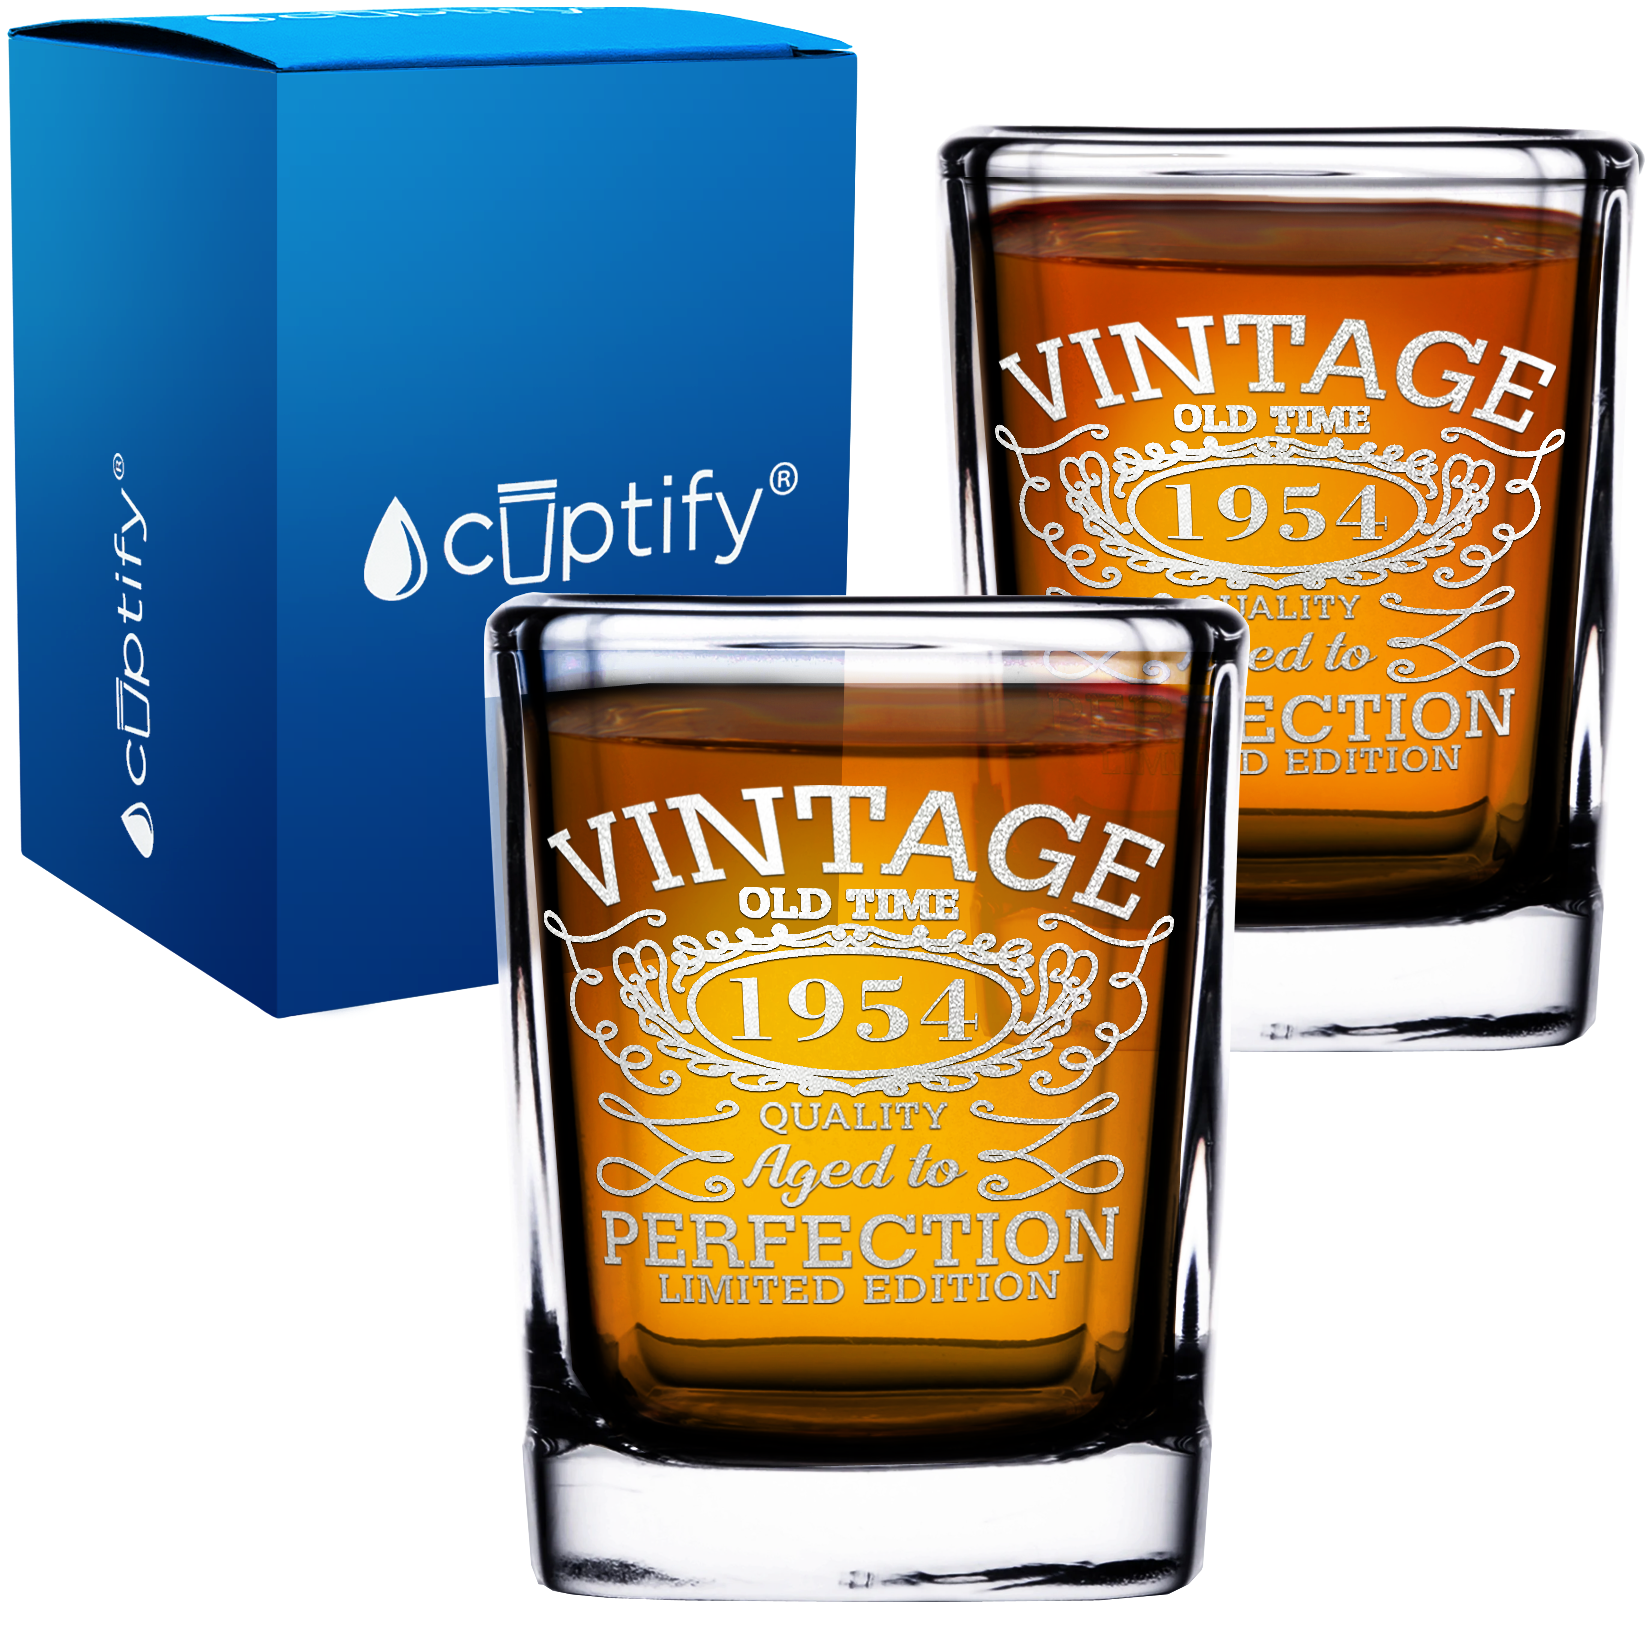 68th Birthday Vintage 68 Years Old Time 1954 Quality 2oz Square Shot Glasses - Set of 2